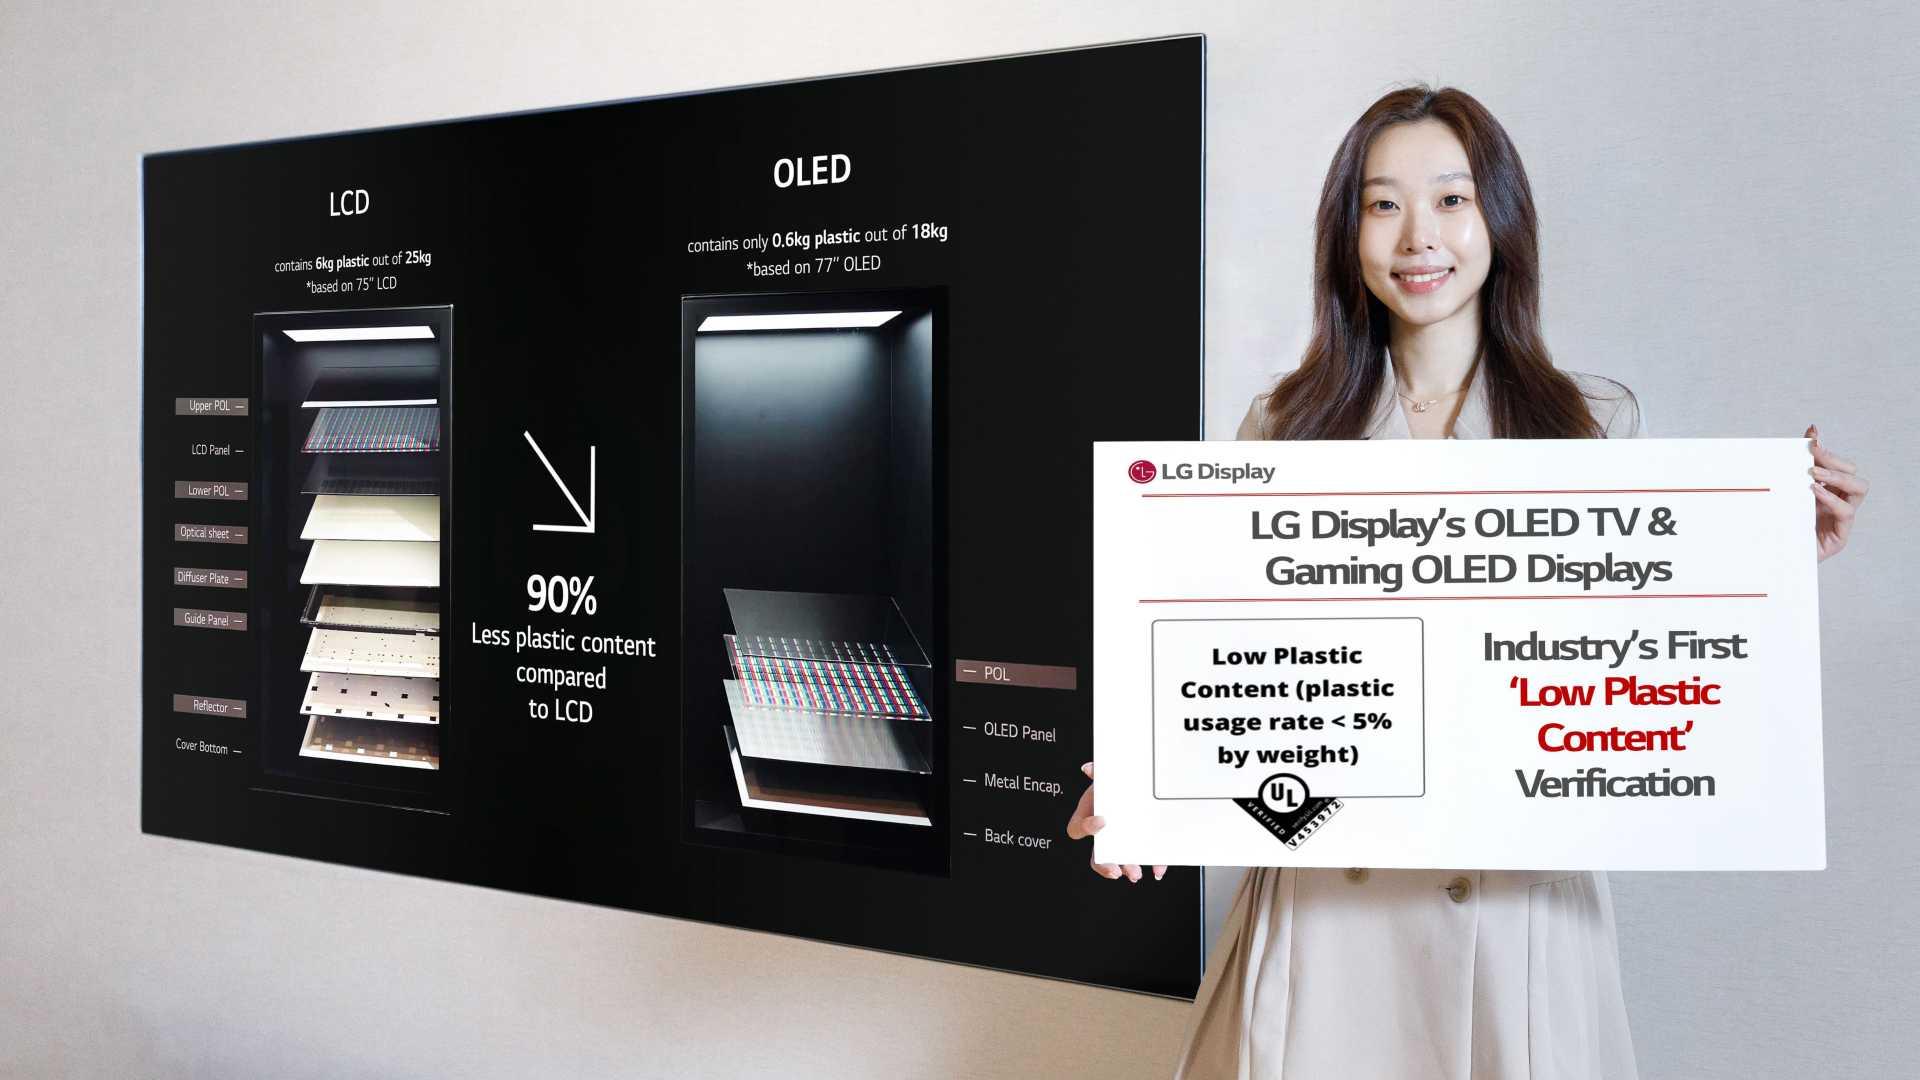 A lady holding LG Display's "low plastic content" certification